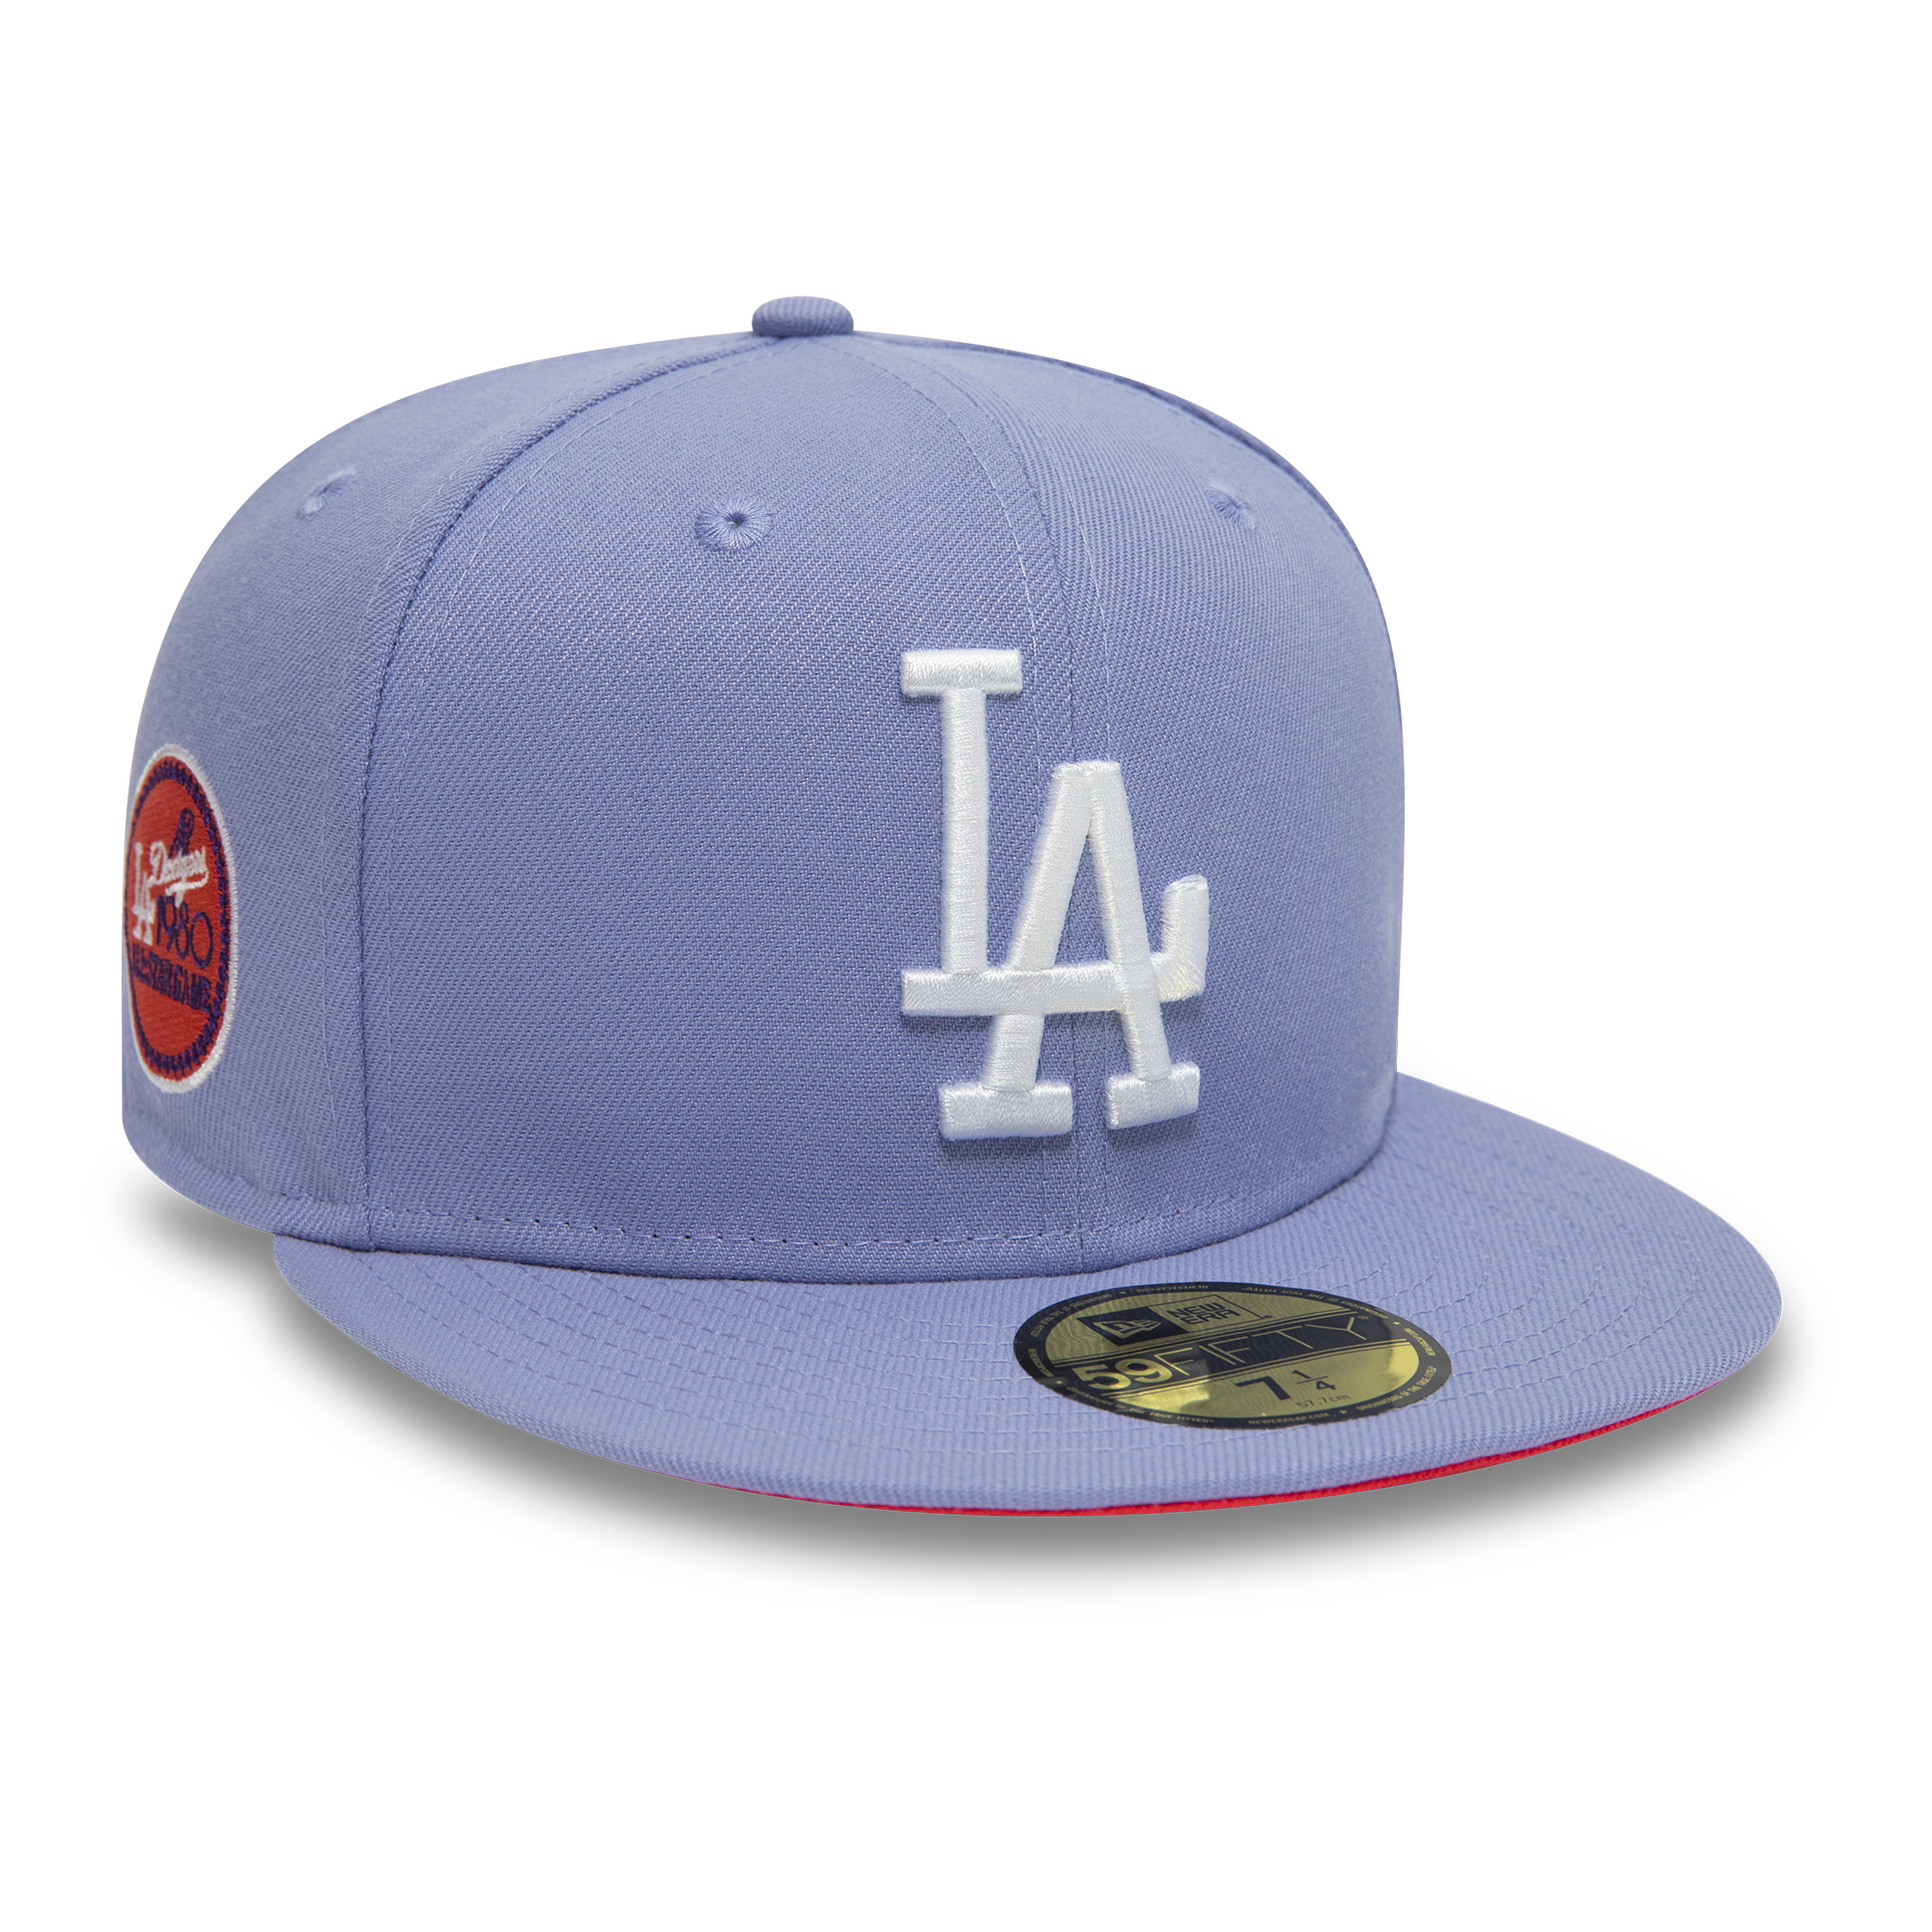 Official New Era LA Dodgers MLB Lavender 59FIFTY Fitted Cap B8322_263 ...